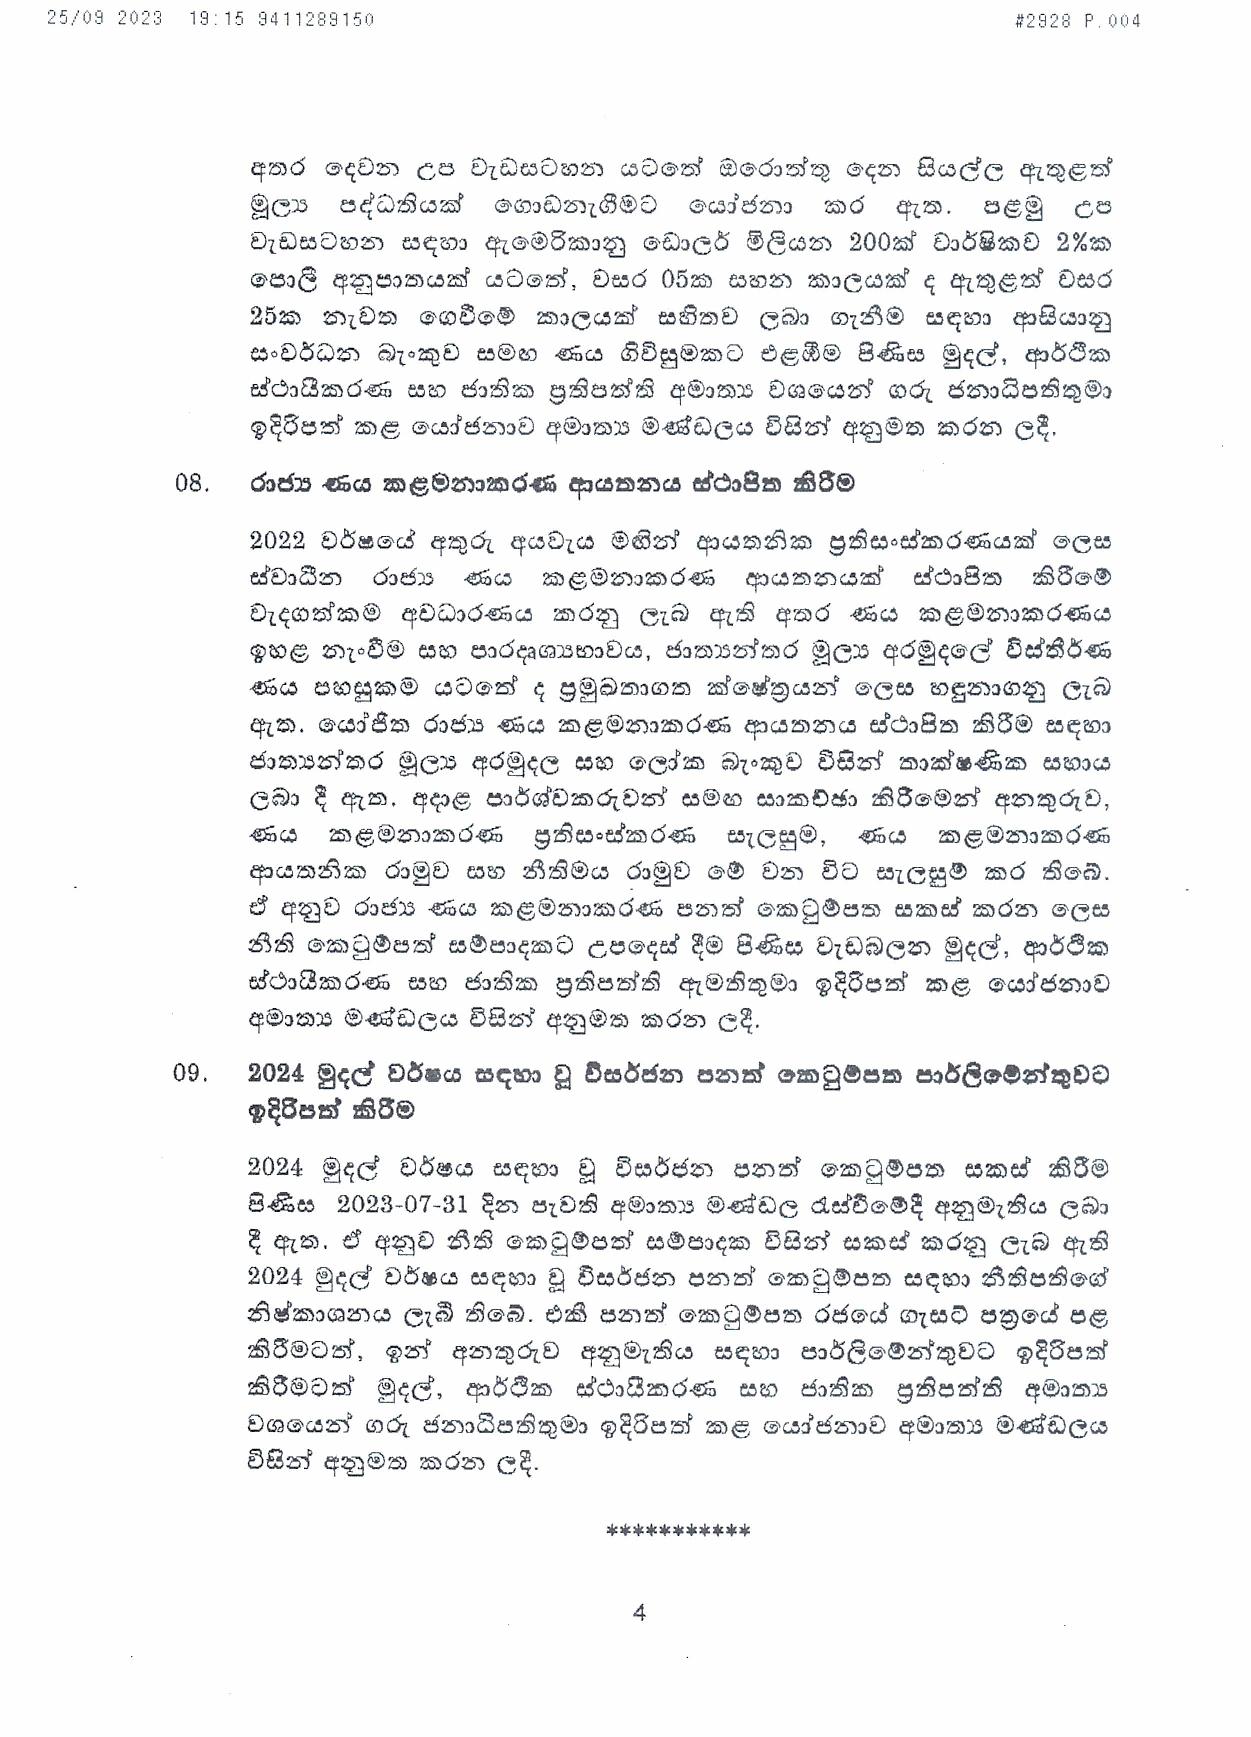 Cabinet Decision on 25.09.2023 page 004